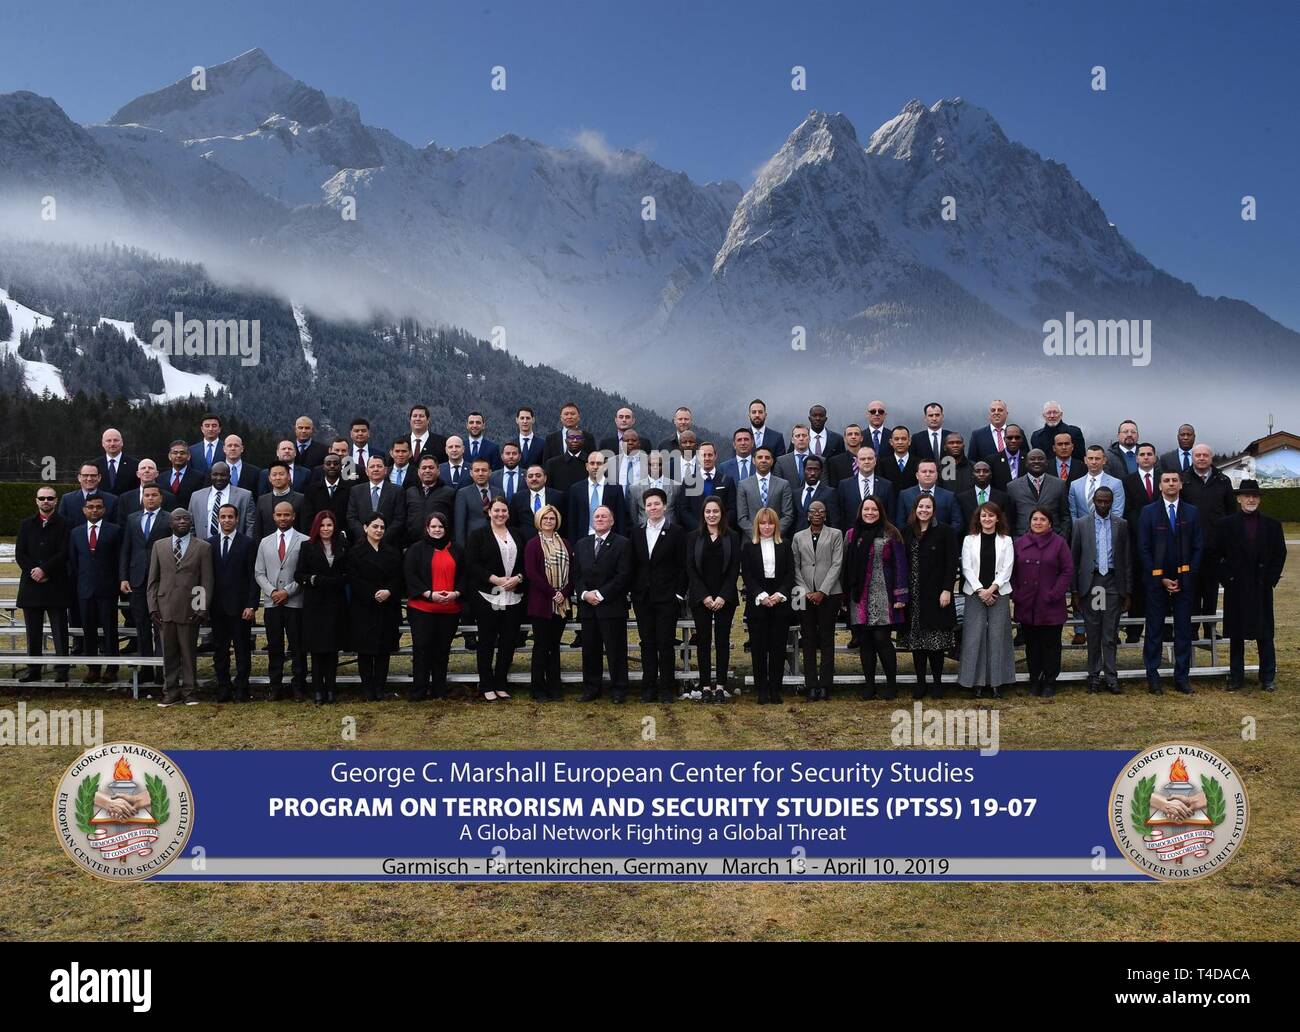 GARMISCH-PARTENKIRCHEN, Germany (March 13, 2019)  - Sixty-three participants from 47 countries started the Program on Terrorism and Security Studies at the George C. Marshall European Center for Security Studies March 13. Stock Photo